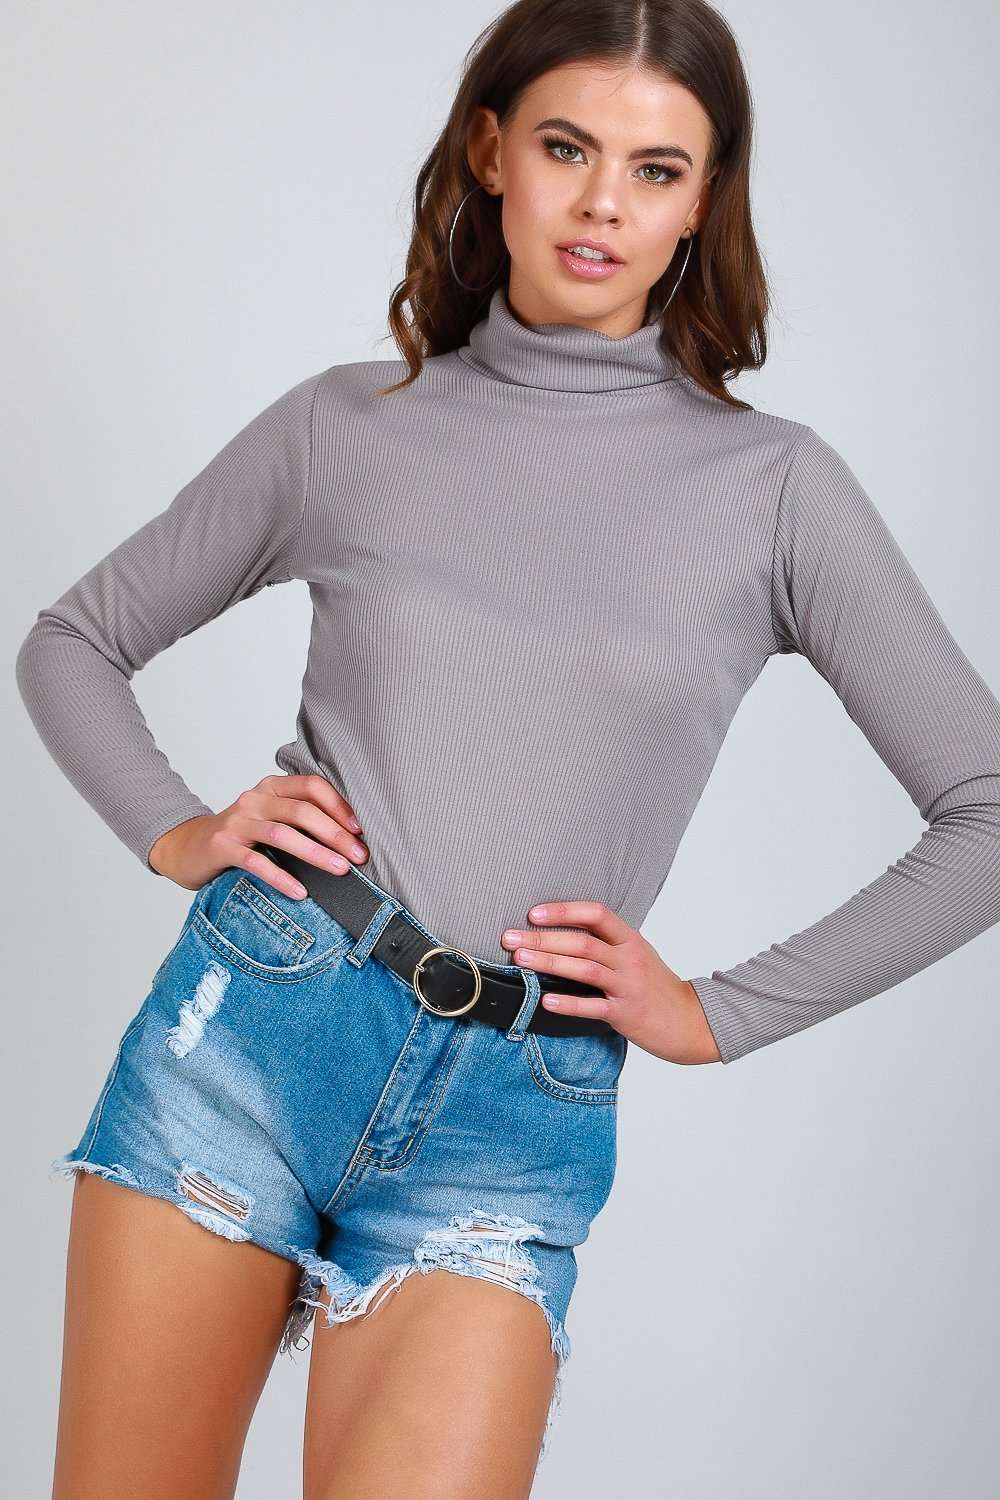 Long Sleeve Navy Polo Neck Knitted Top - bejealous-com